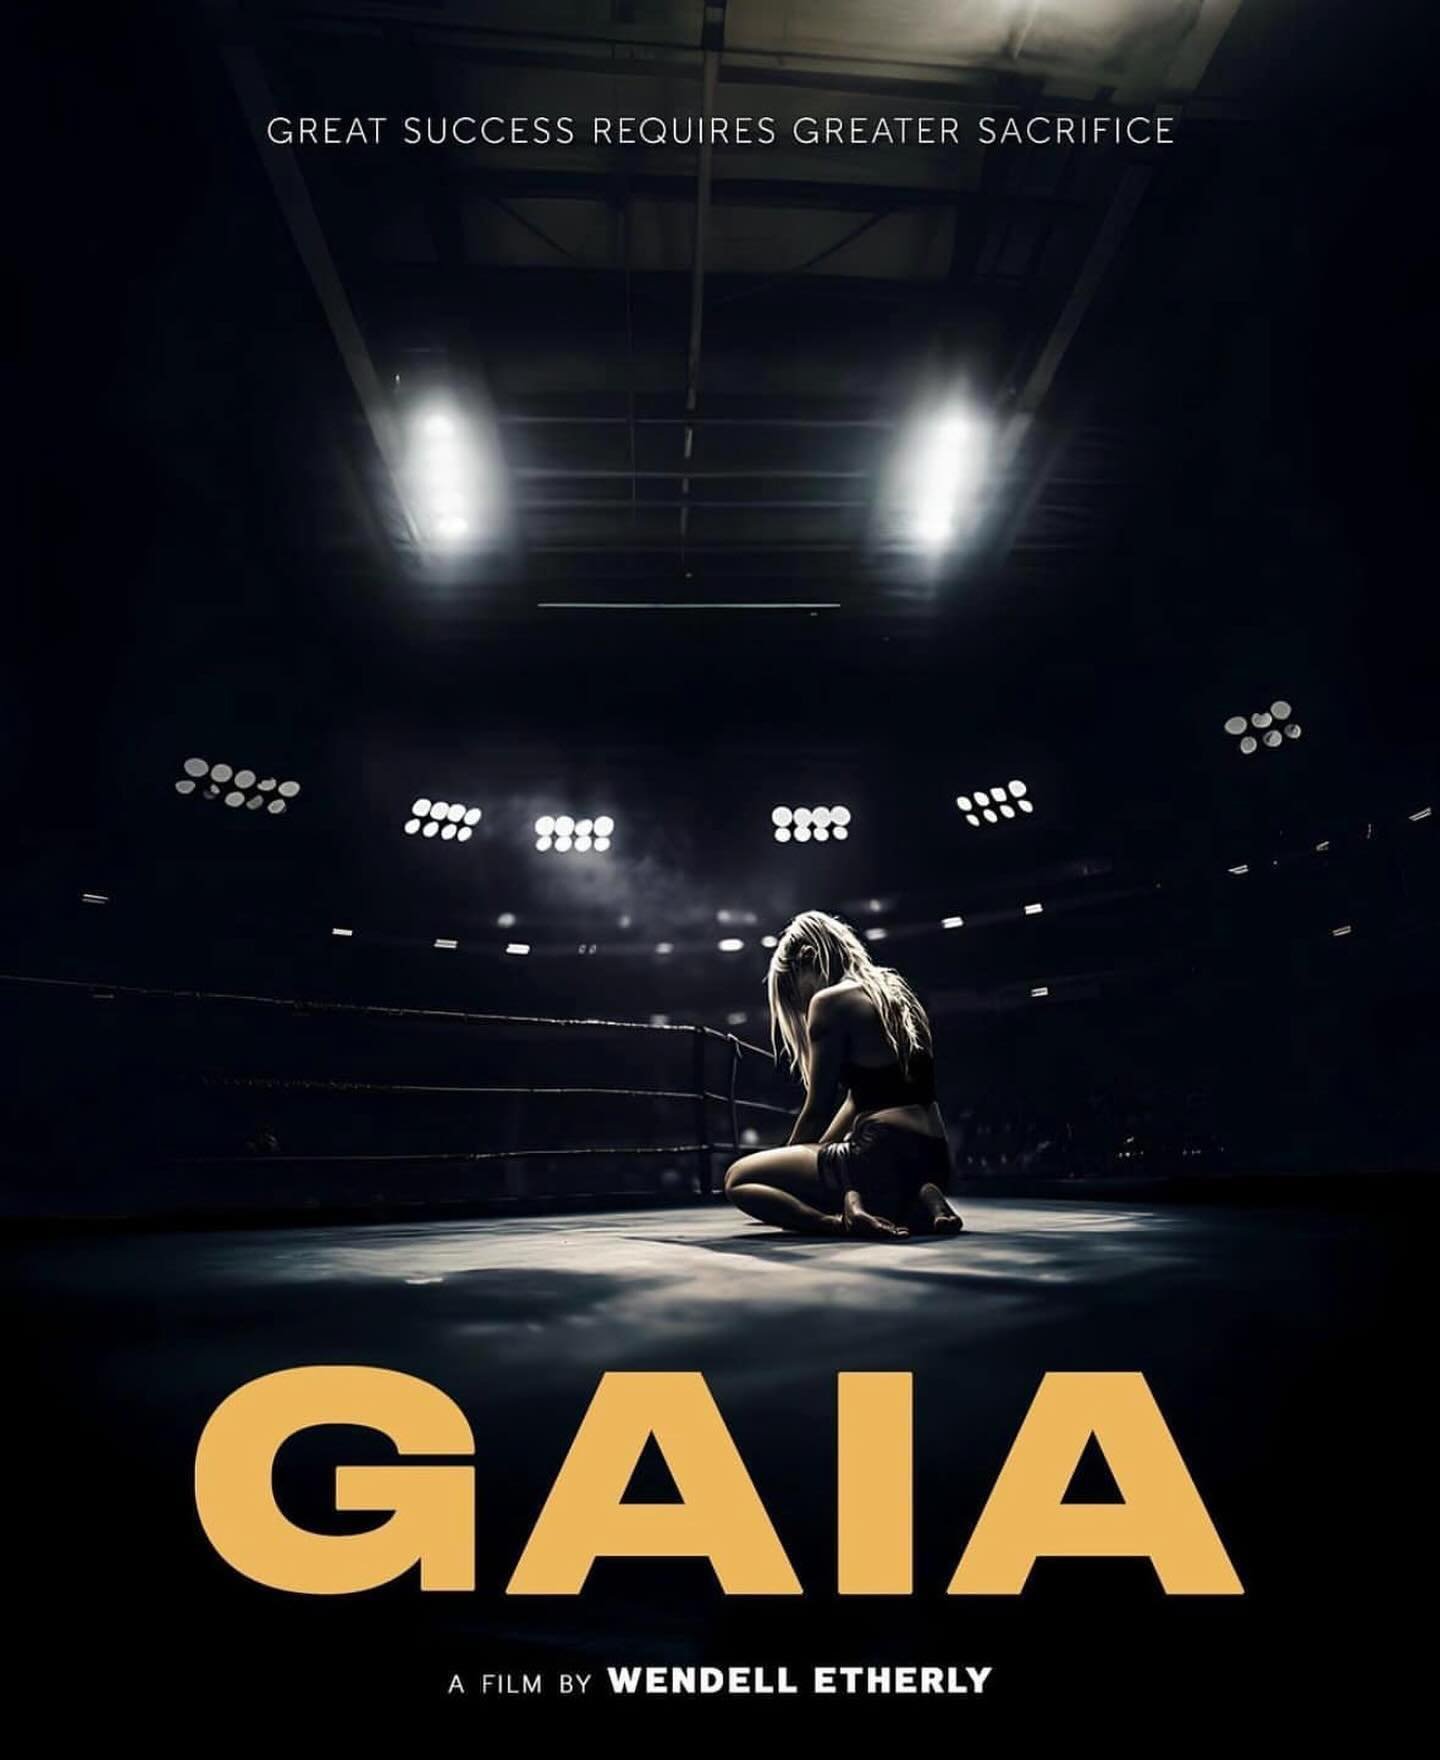 So freakin excited to be part of this Full Feature Film @gaia_mma_film 💥🥊 as the lead EMT in the cage!

Working next to such talent and hard work is so inspiring, I can NOT wait to see this on the big screen! Check it out!

And oh, getting screamed